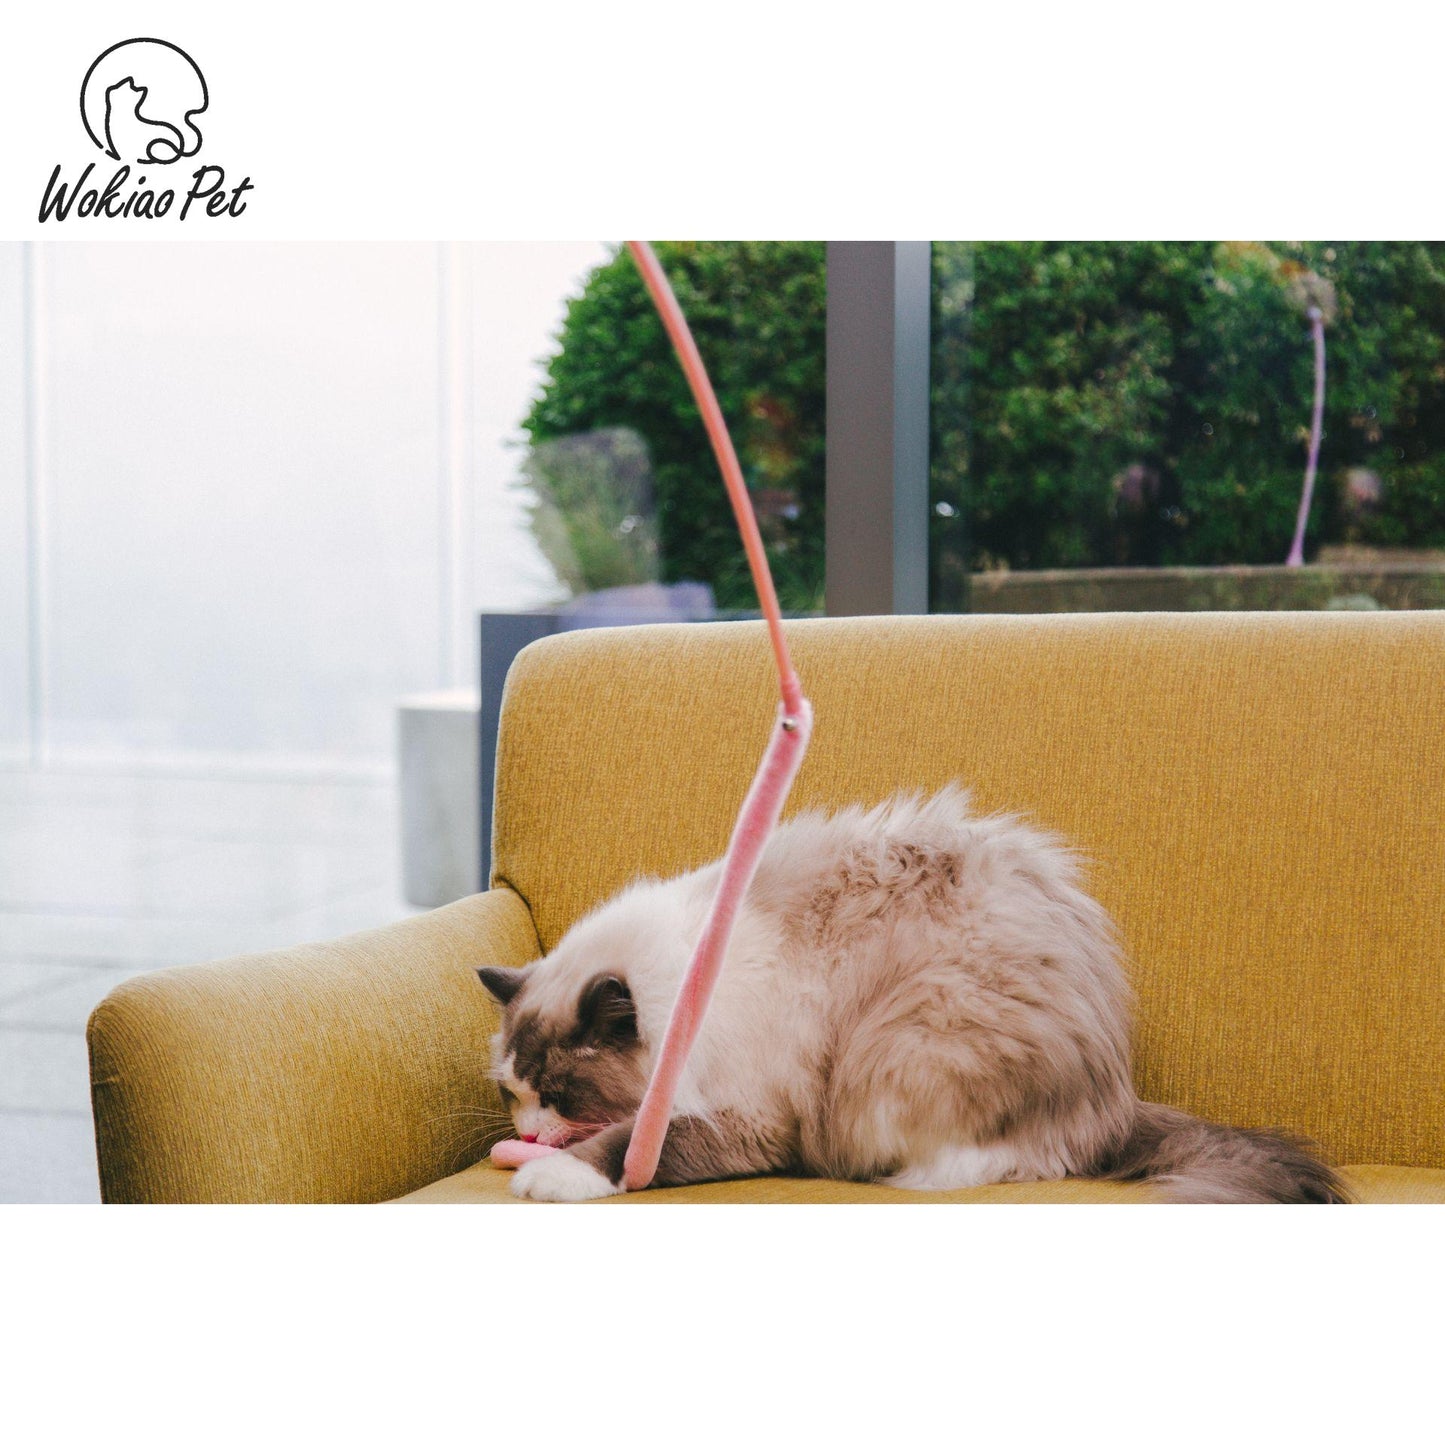 Pink-tailed cat wand toy, perfect for kittens.